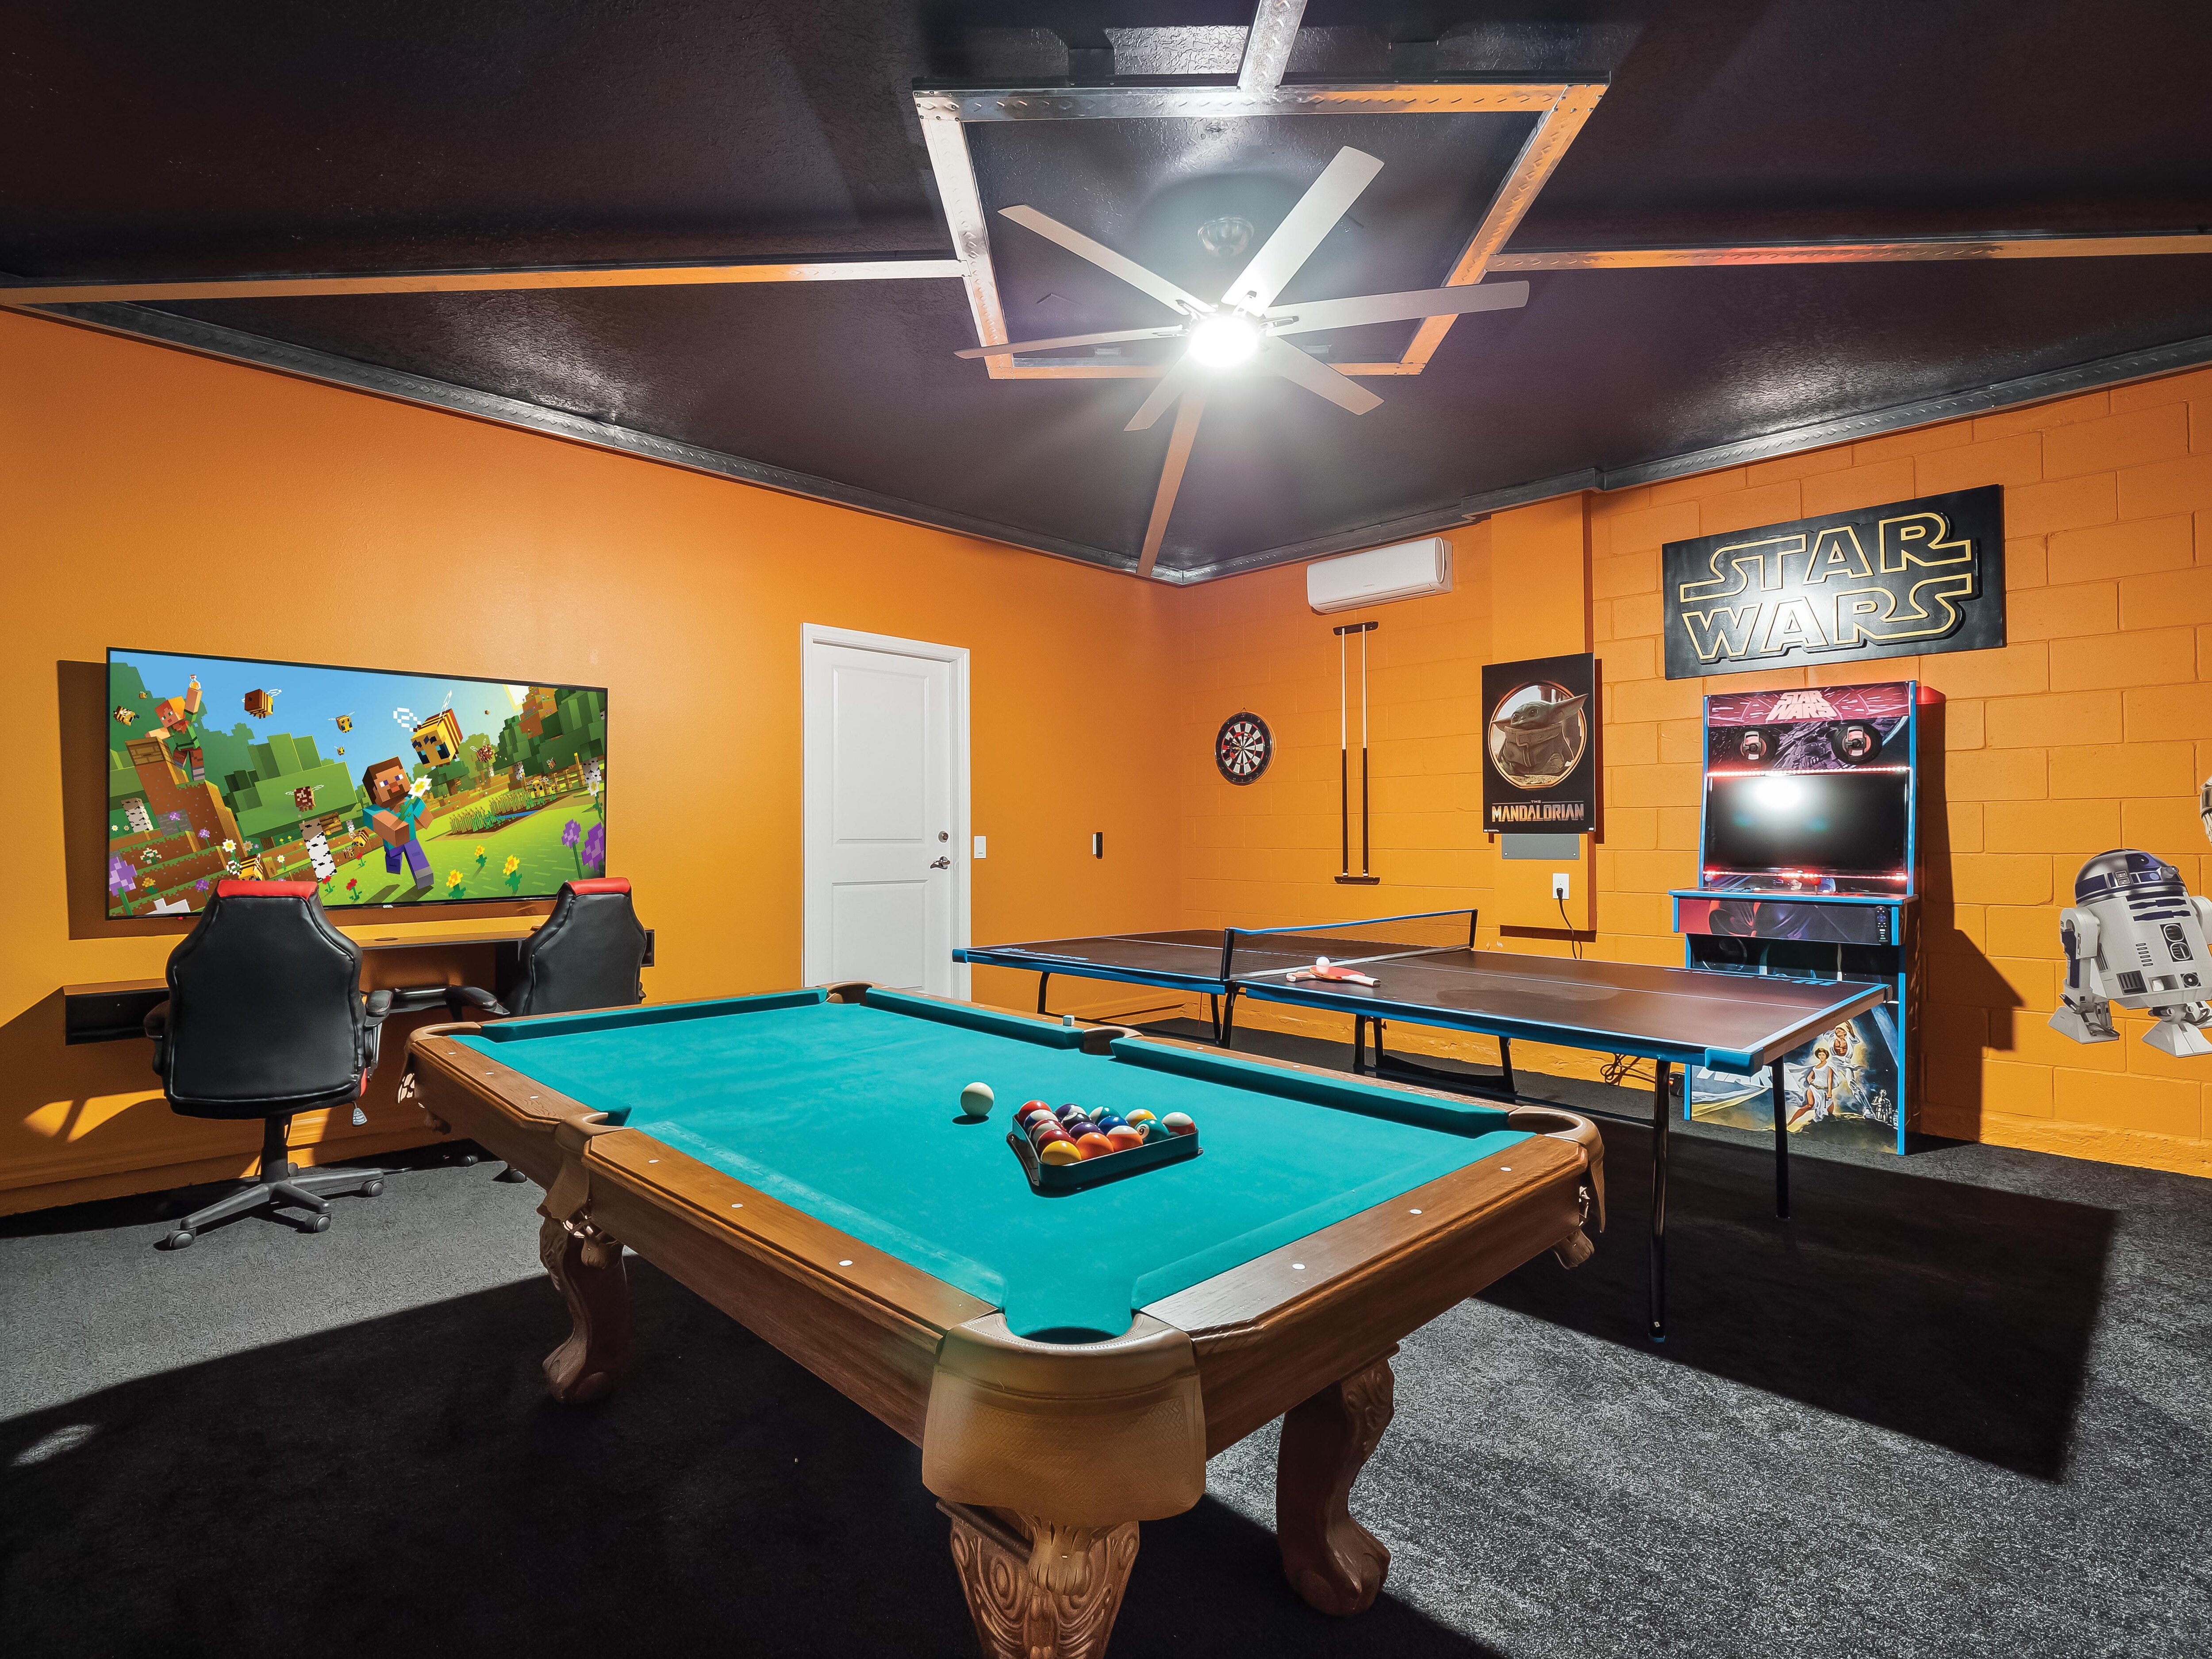 Incredible Game Room with Video Games, Table Tennis, Pool Table, and more!